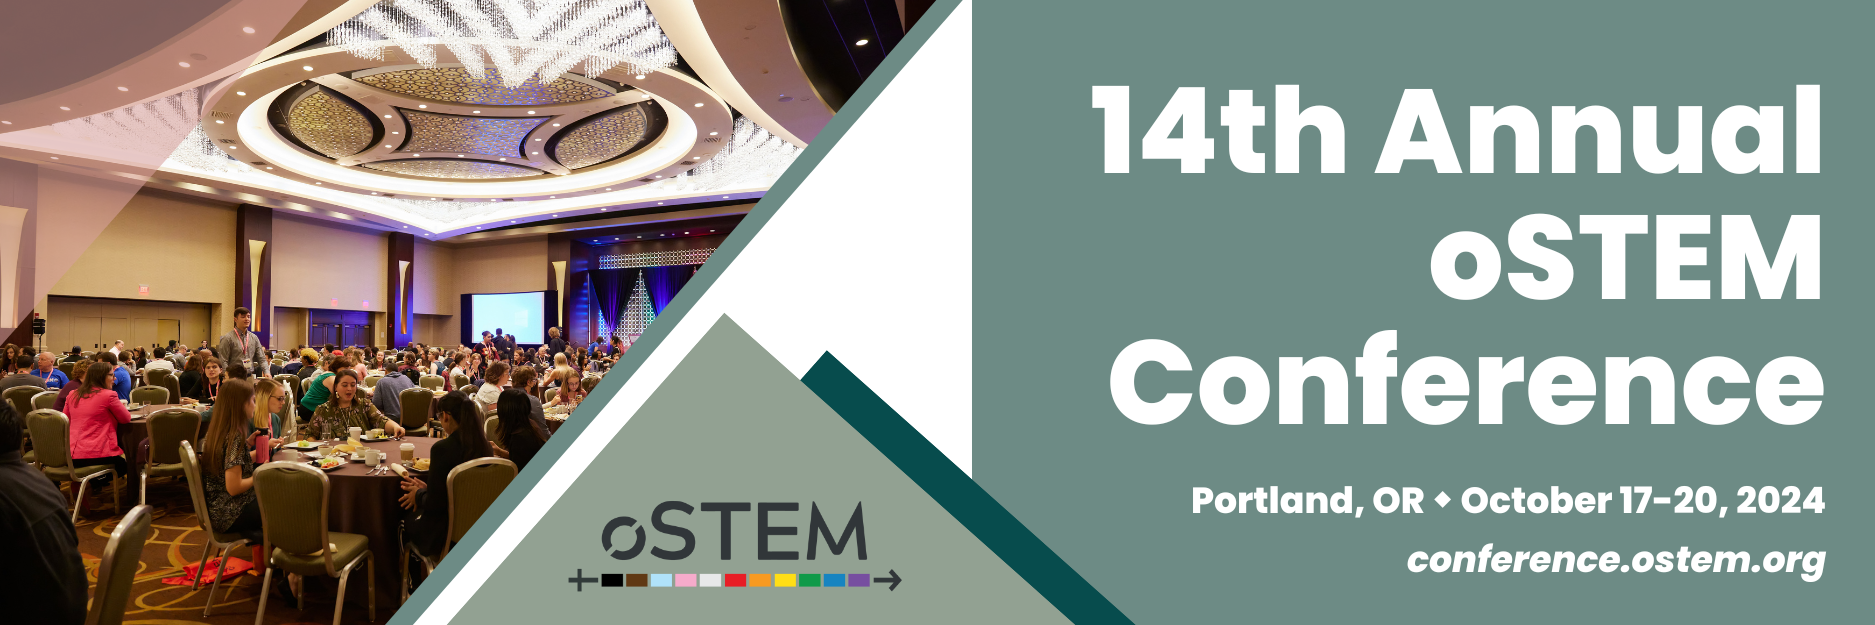 Banner for the 14th Annual oSTEM Conference, from October 17-20 in Portland, OR.